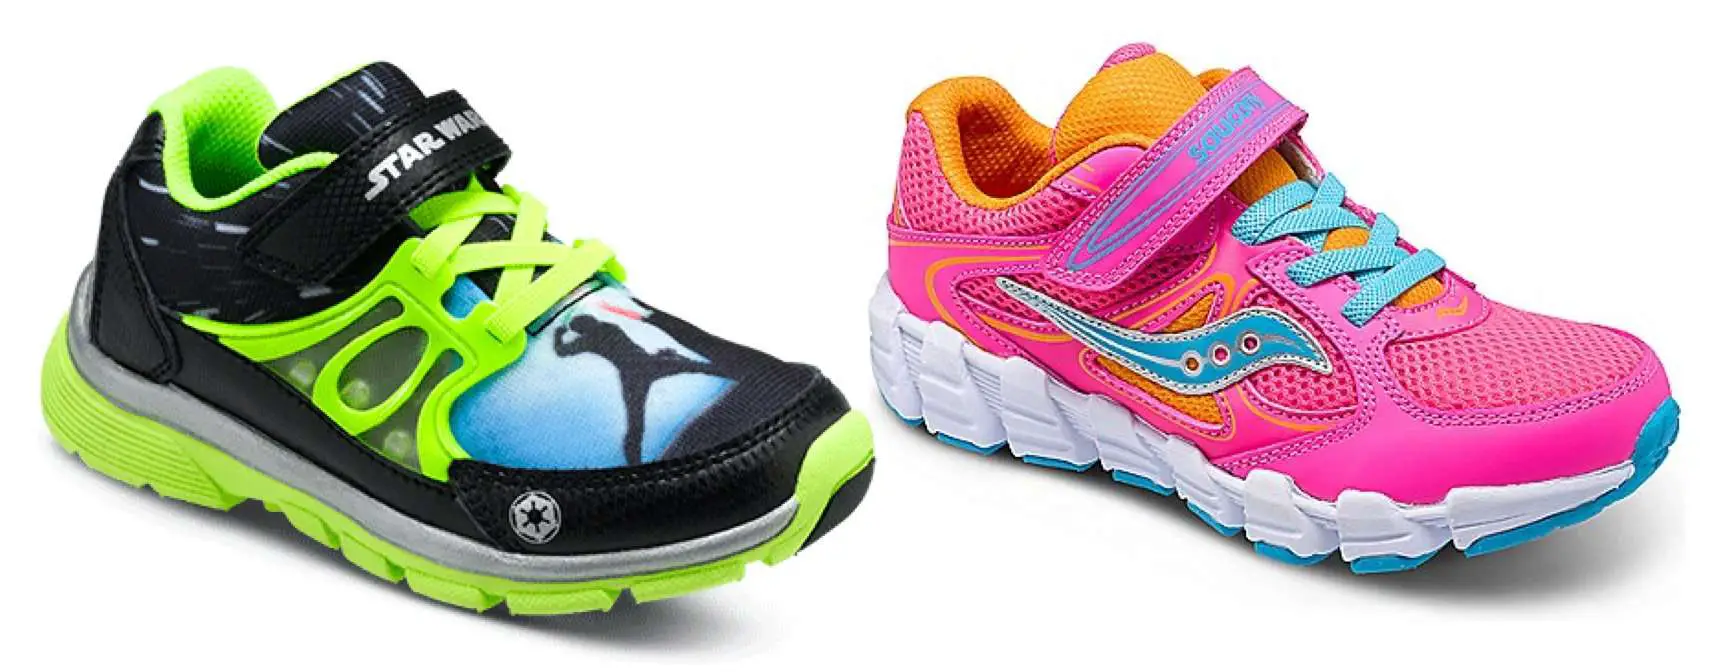 Stride Rite Flash Sale: Kids Shoes ONLY $19.99 Shipped ...